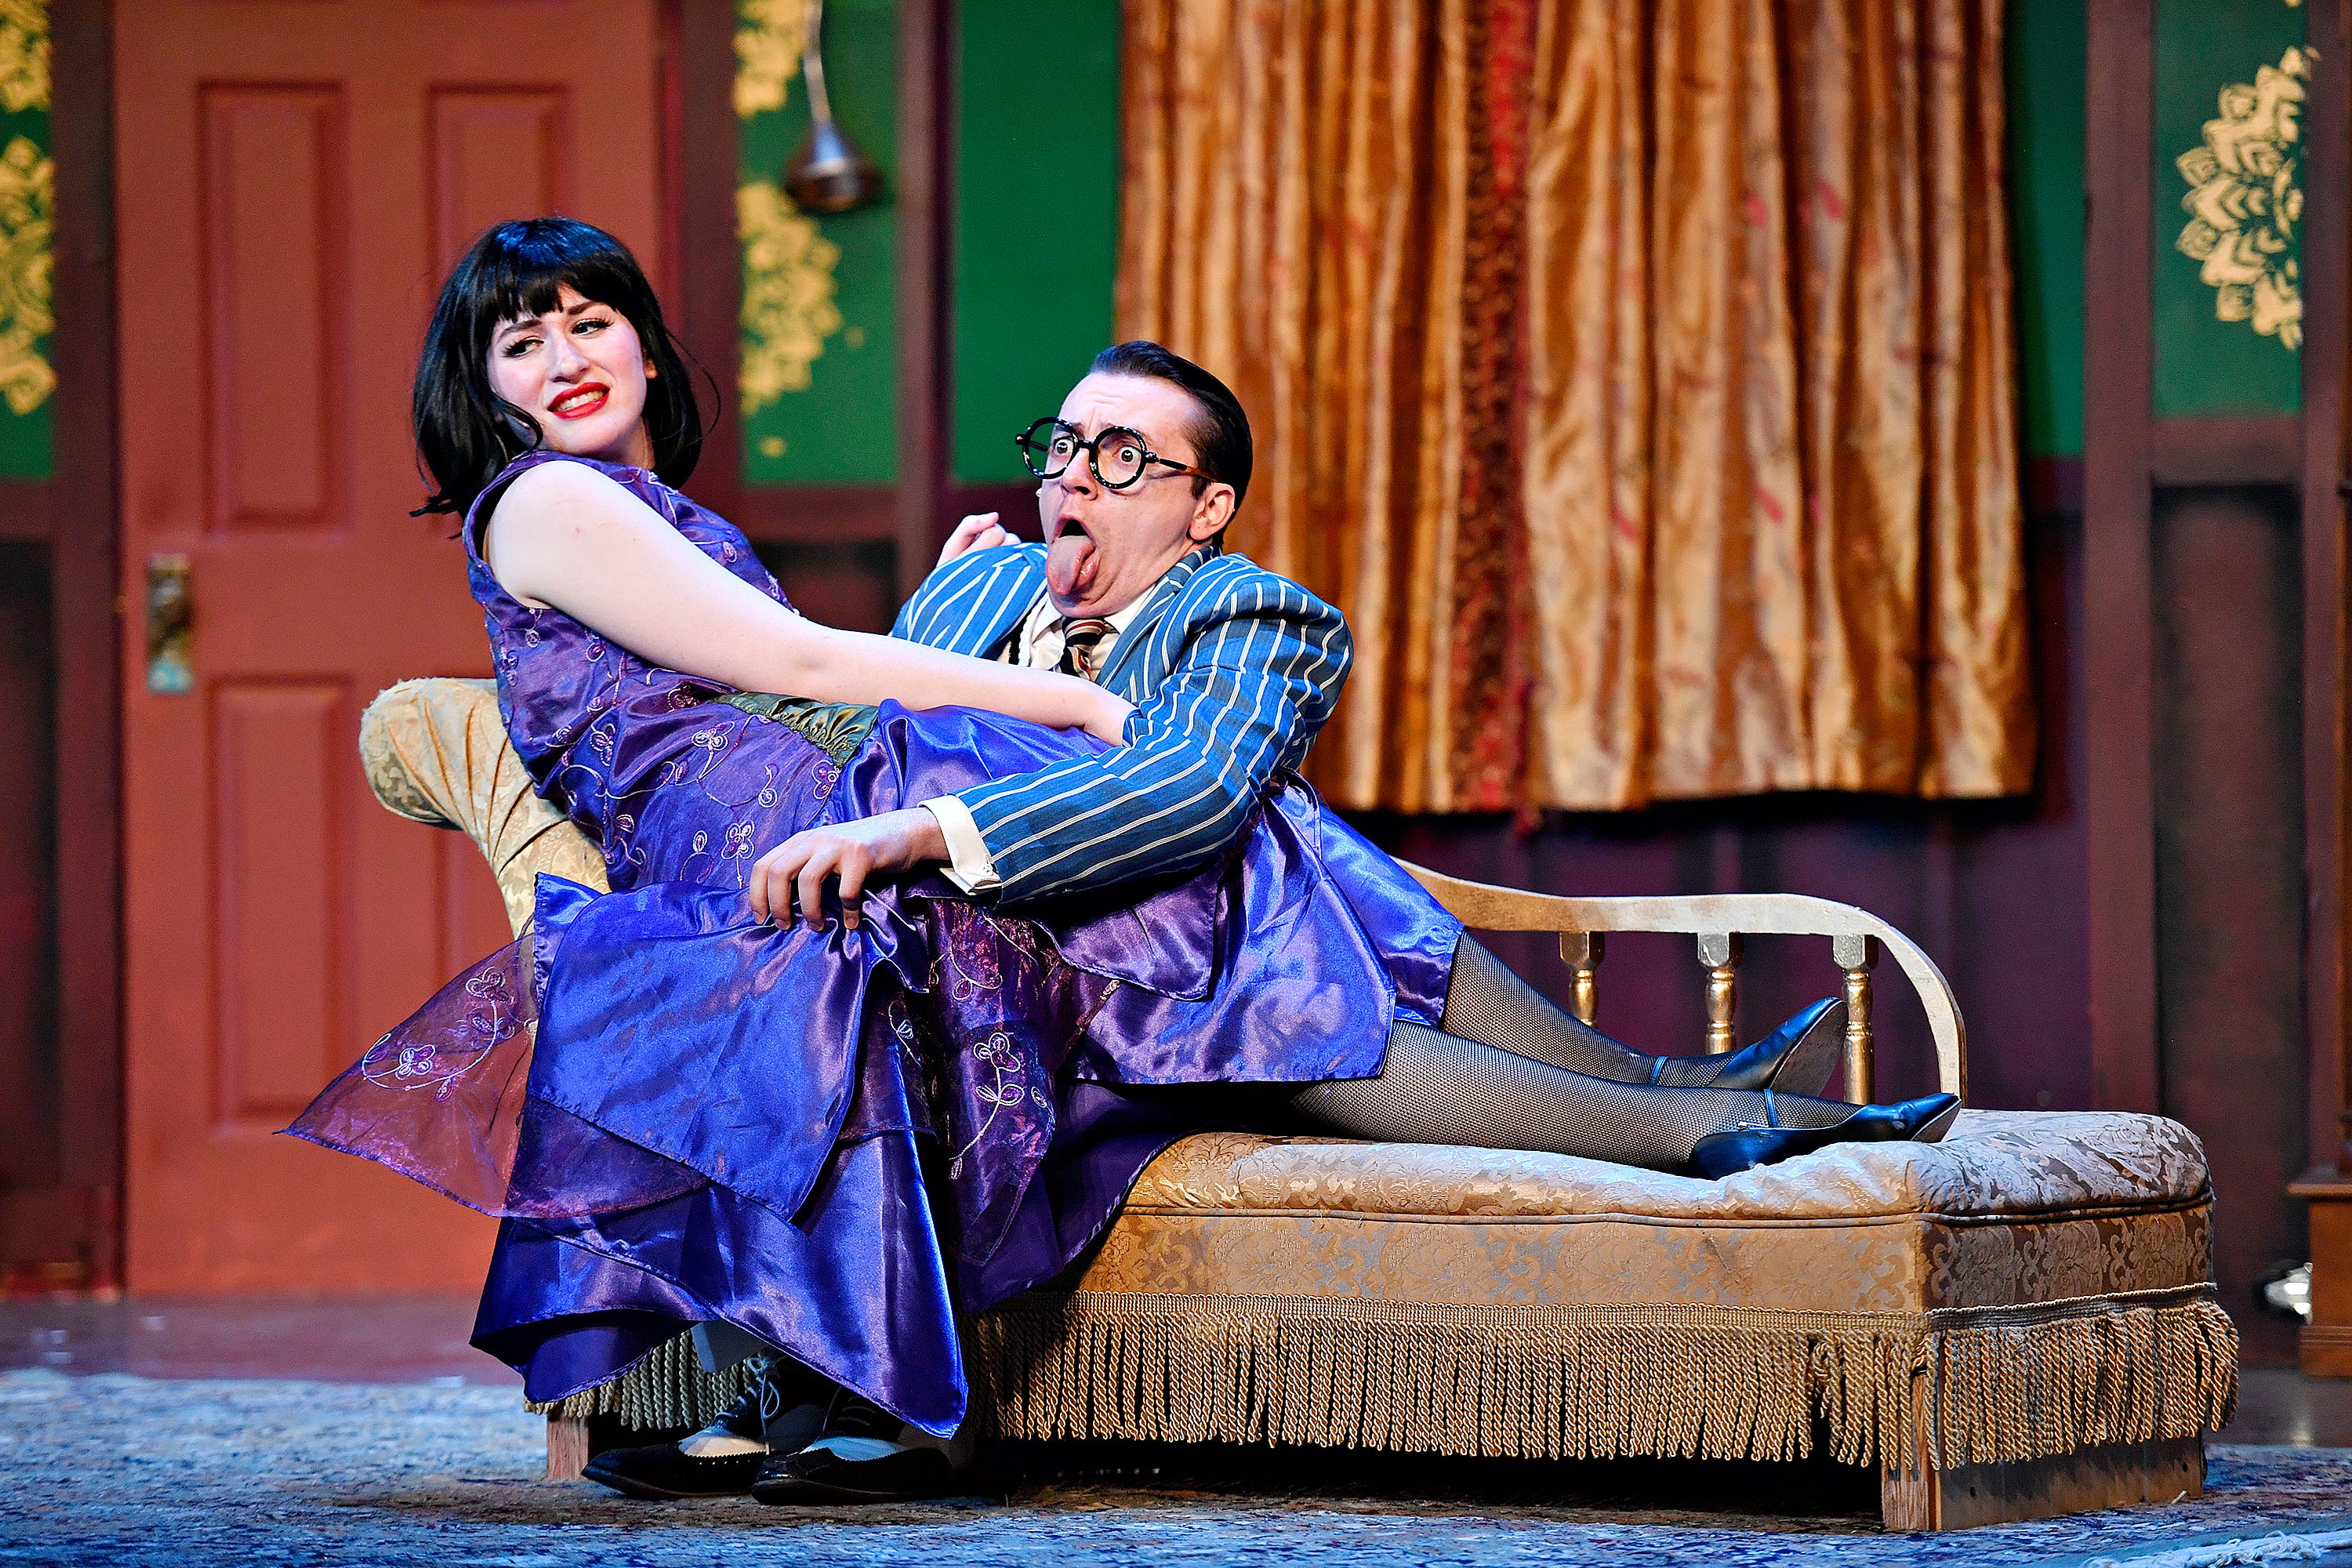 Florence Collleymore (Makaley Warner), left, and Max Bennett as Cecil Haversham (Tree Layton Zuzzio) during dress rehearsal for The Play That Goes Wrong at The Belmont Theatre in Spring Garden Township, Wednesday, April 17, 2024. The show runs April 19-21, 25-28. For details, go to www.thebelmont.org. (Dawn J. Sagert/The York Dispatch)